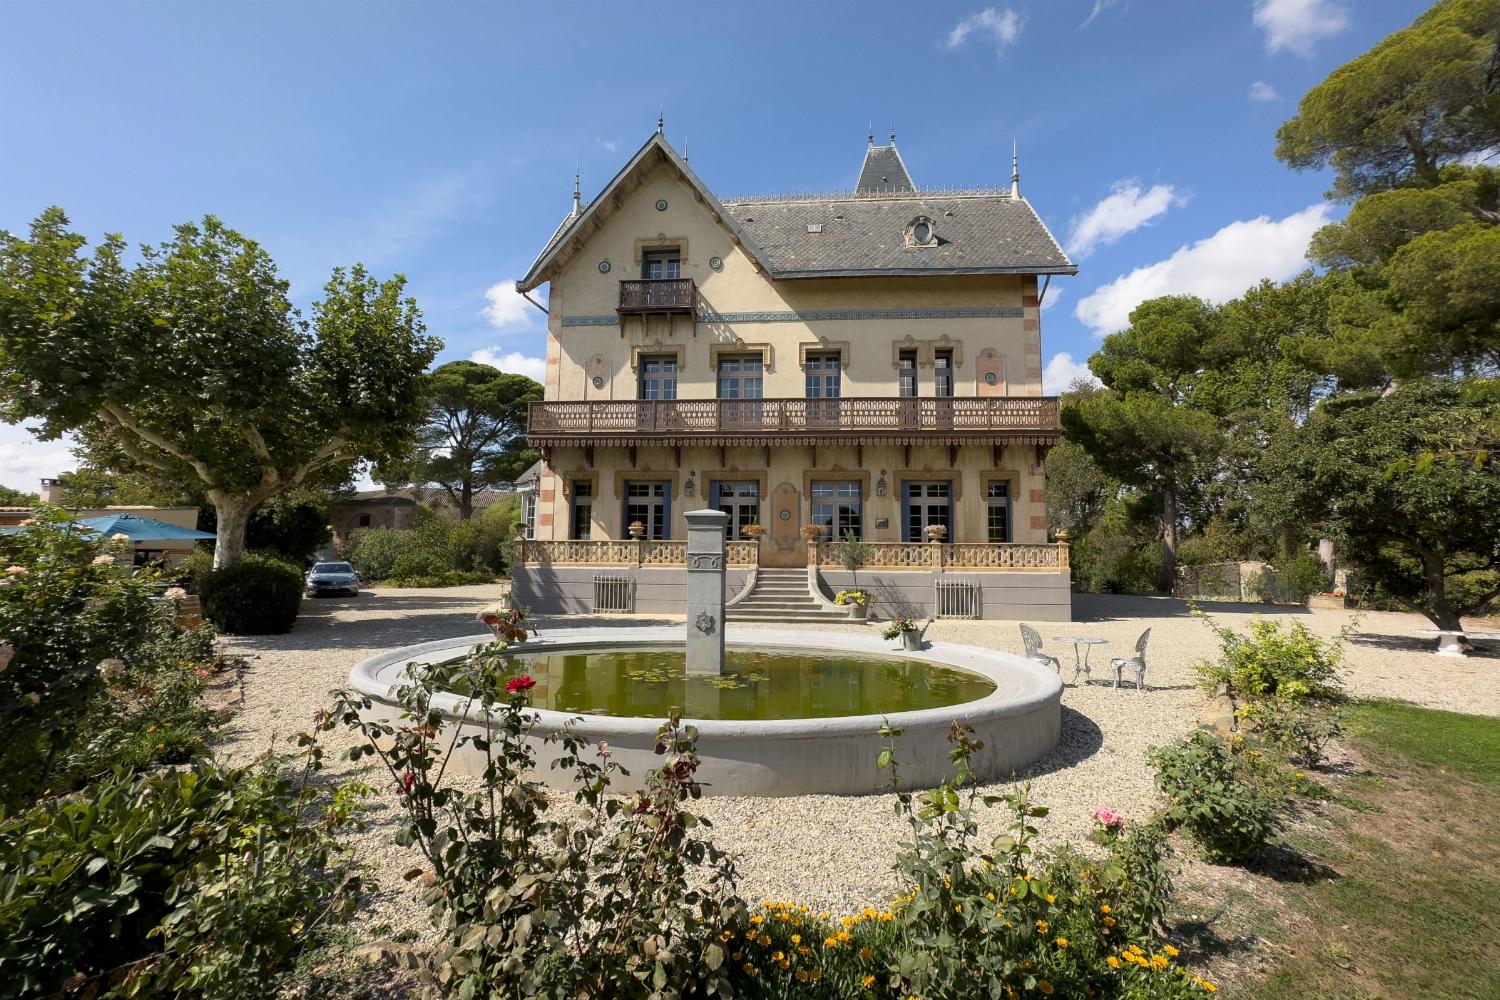 Holiday château in the South of France